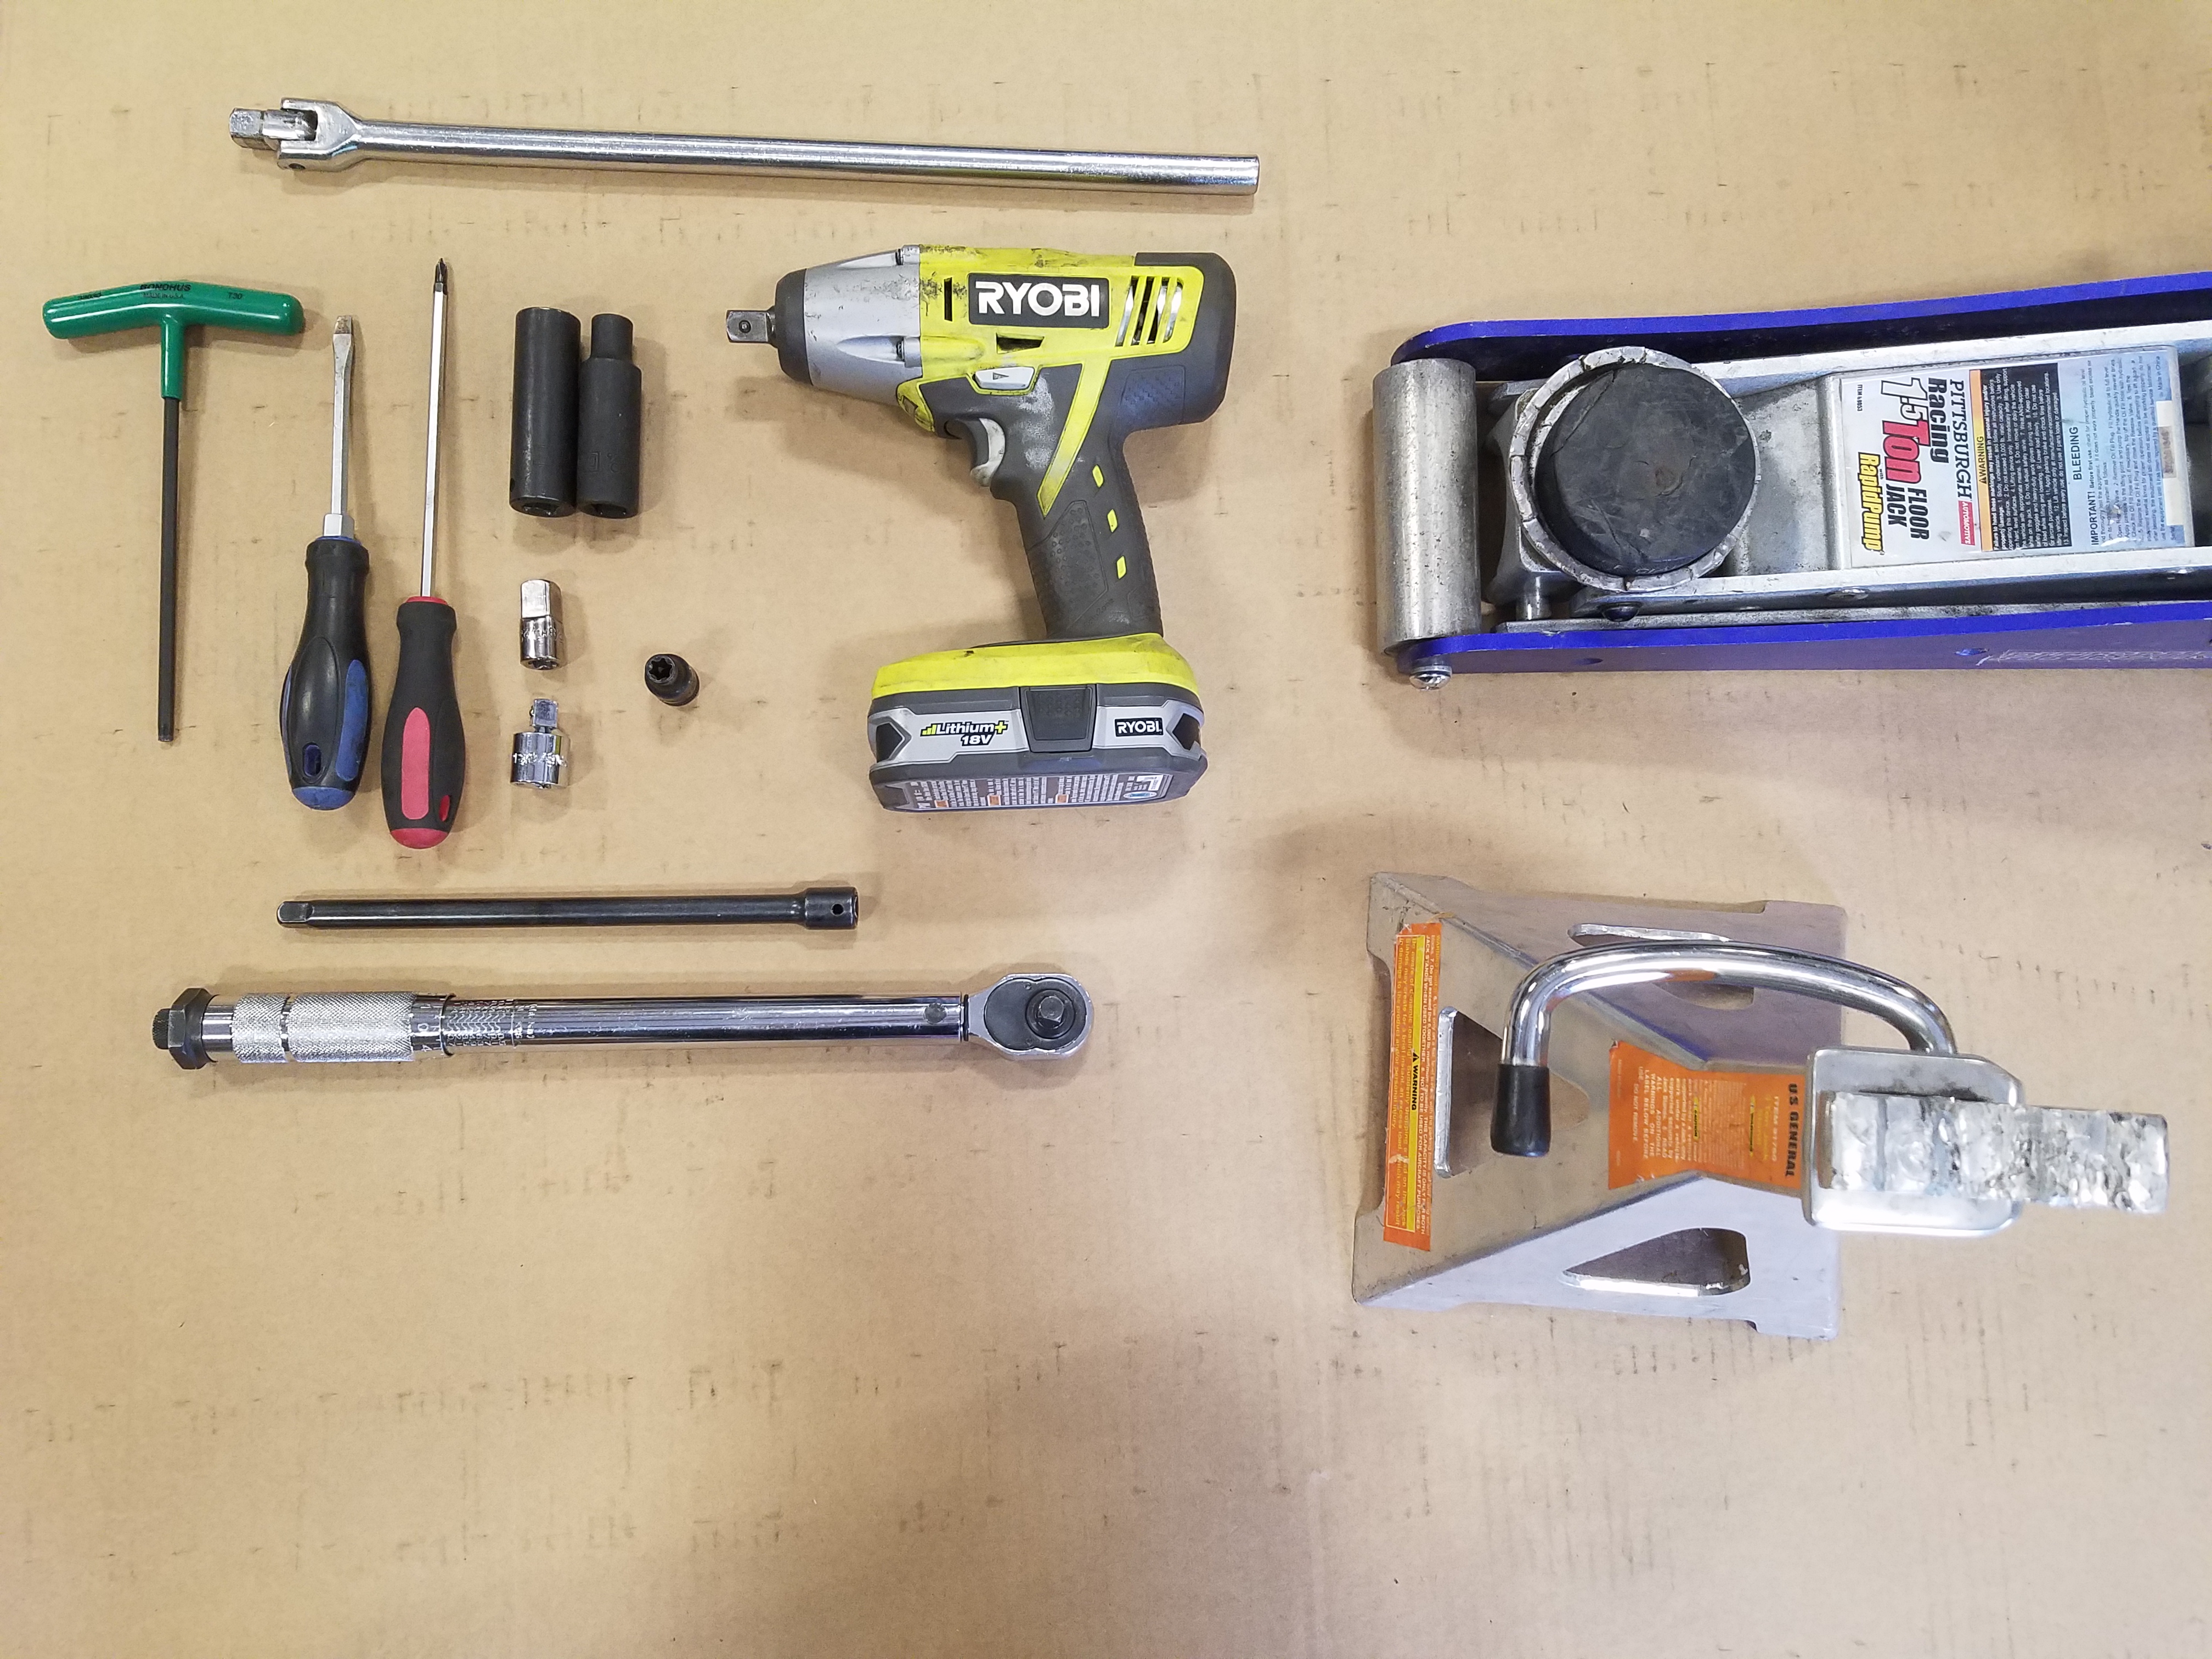 All the tools you'll need.